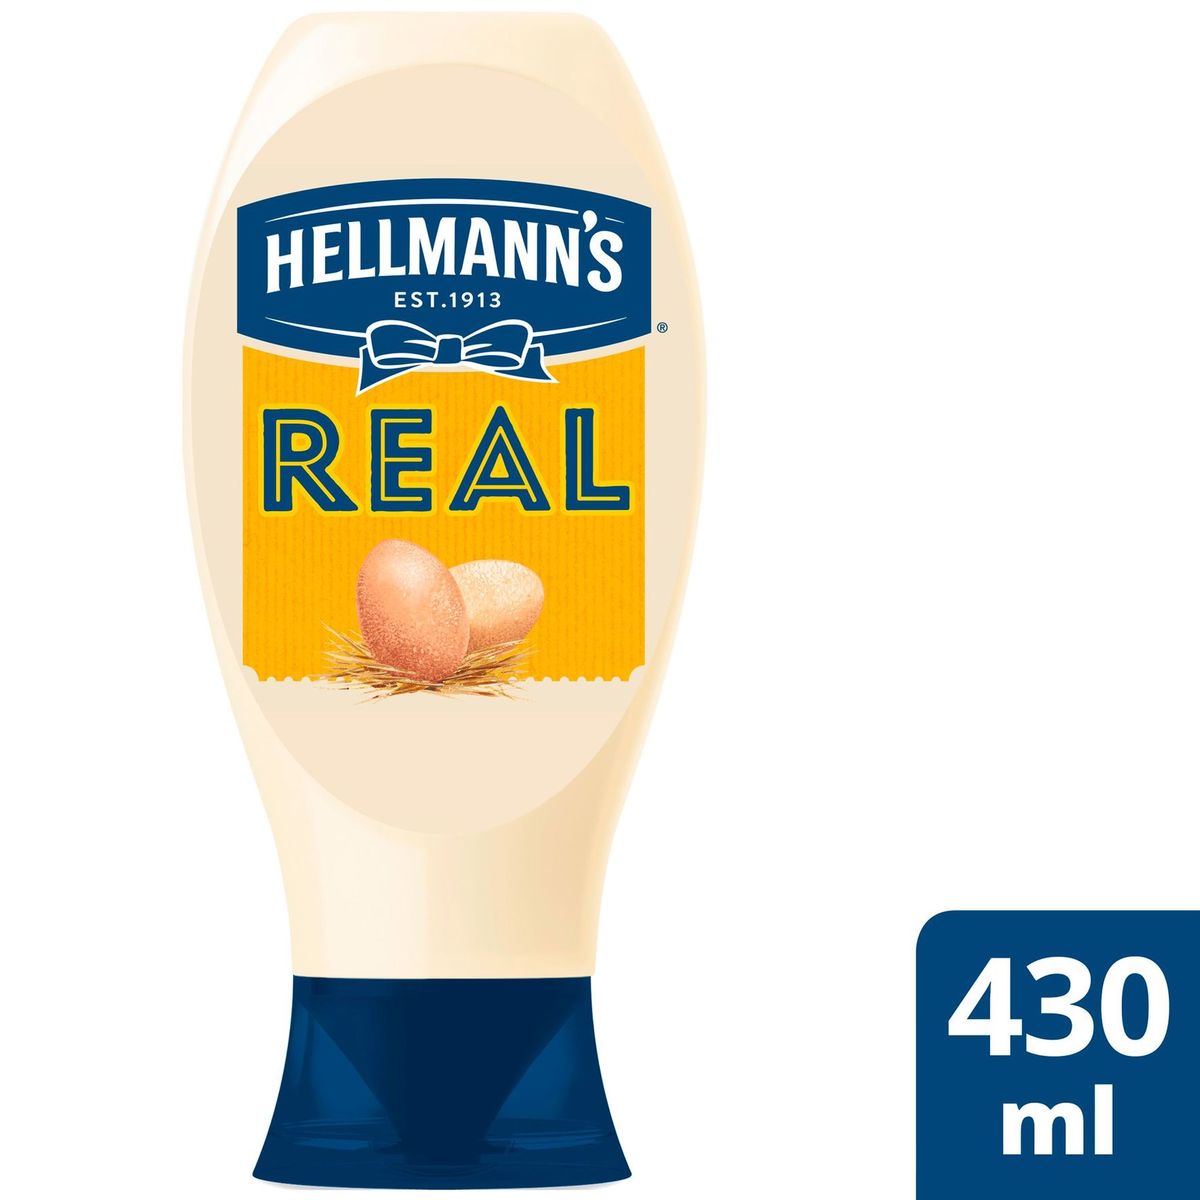 Hellmann's Real Squeeze Mayonaise Original 430 ml